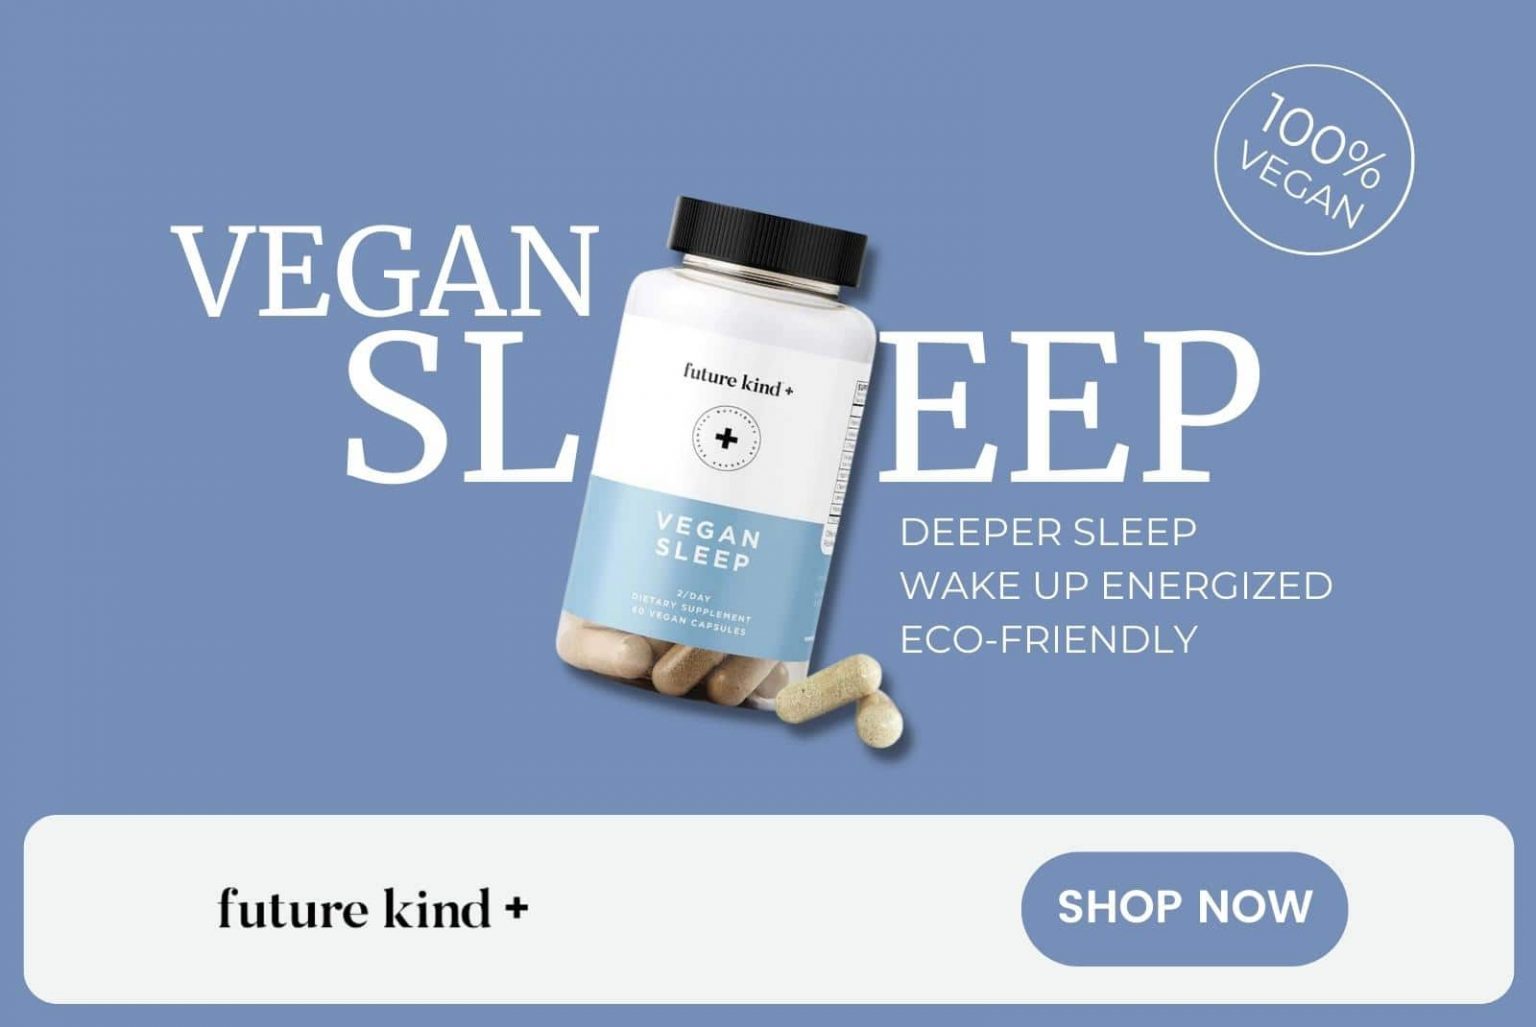 There are plenty of reasons why a lot of us struggle to get to sleep. Future kind+ safe and powerful vegan sleep aid is here to help.